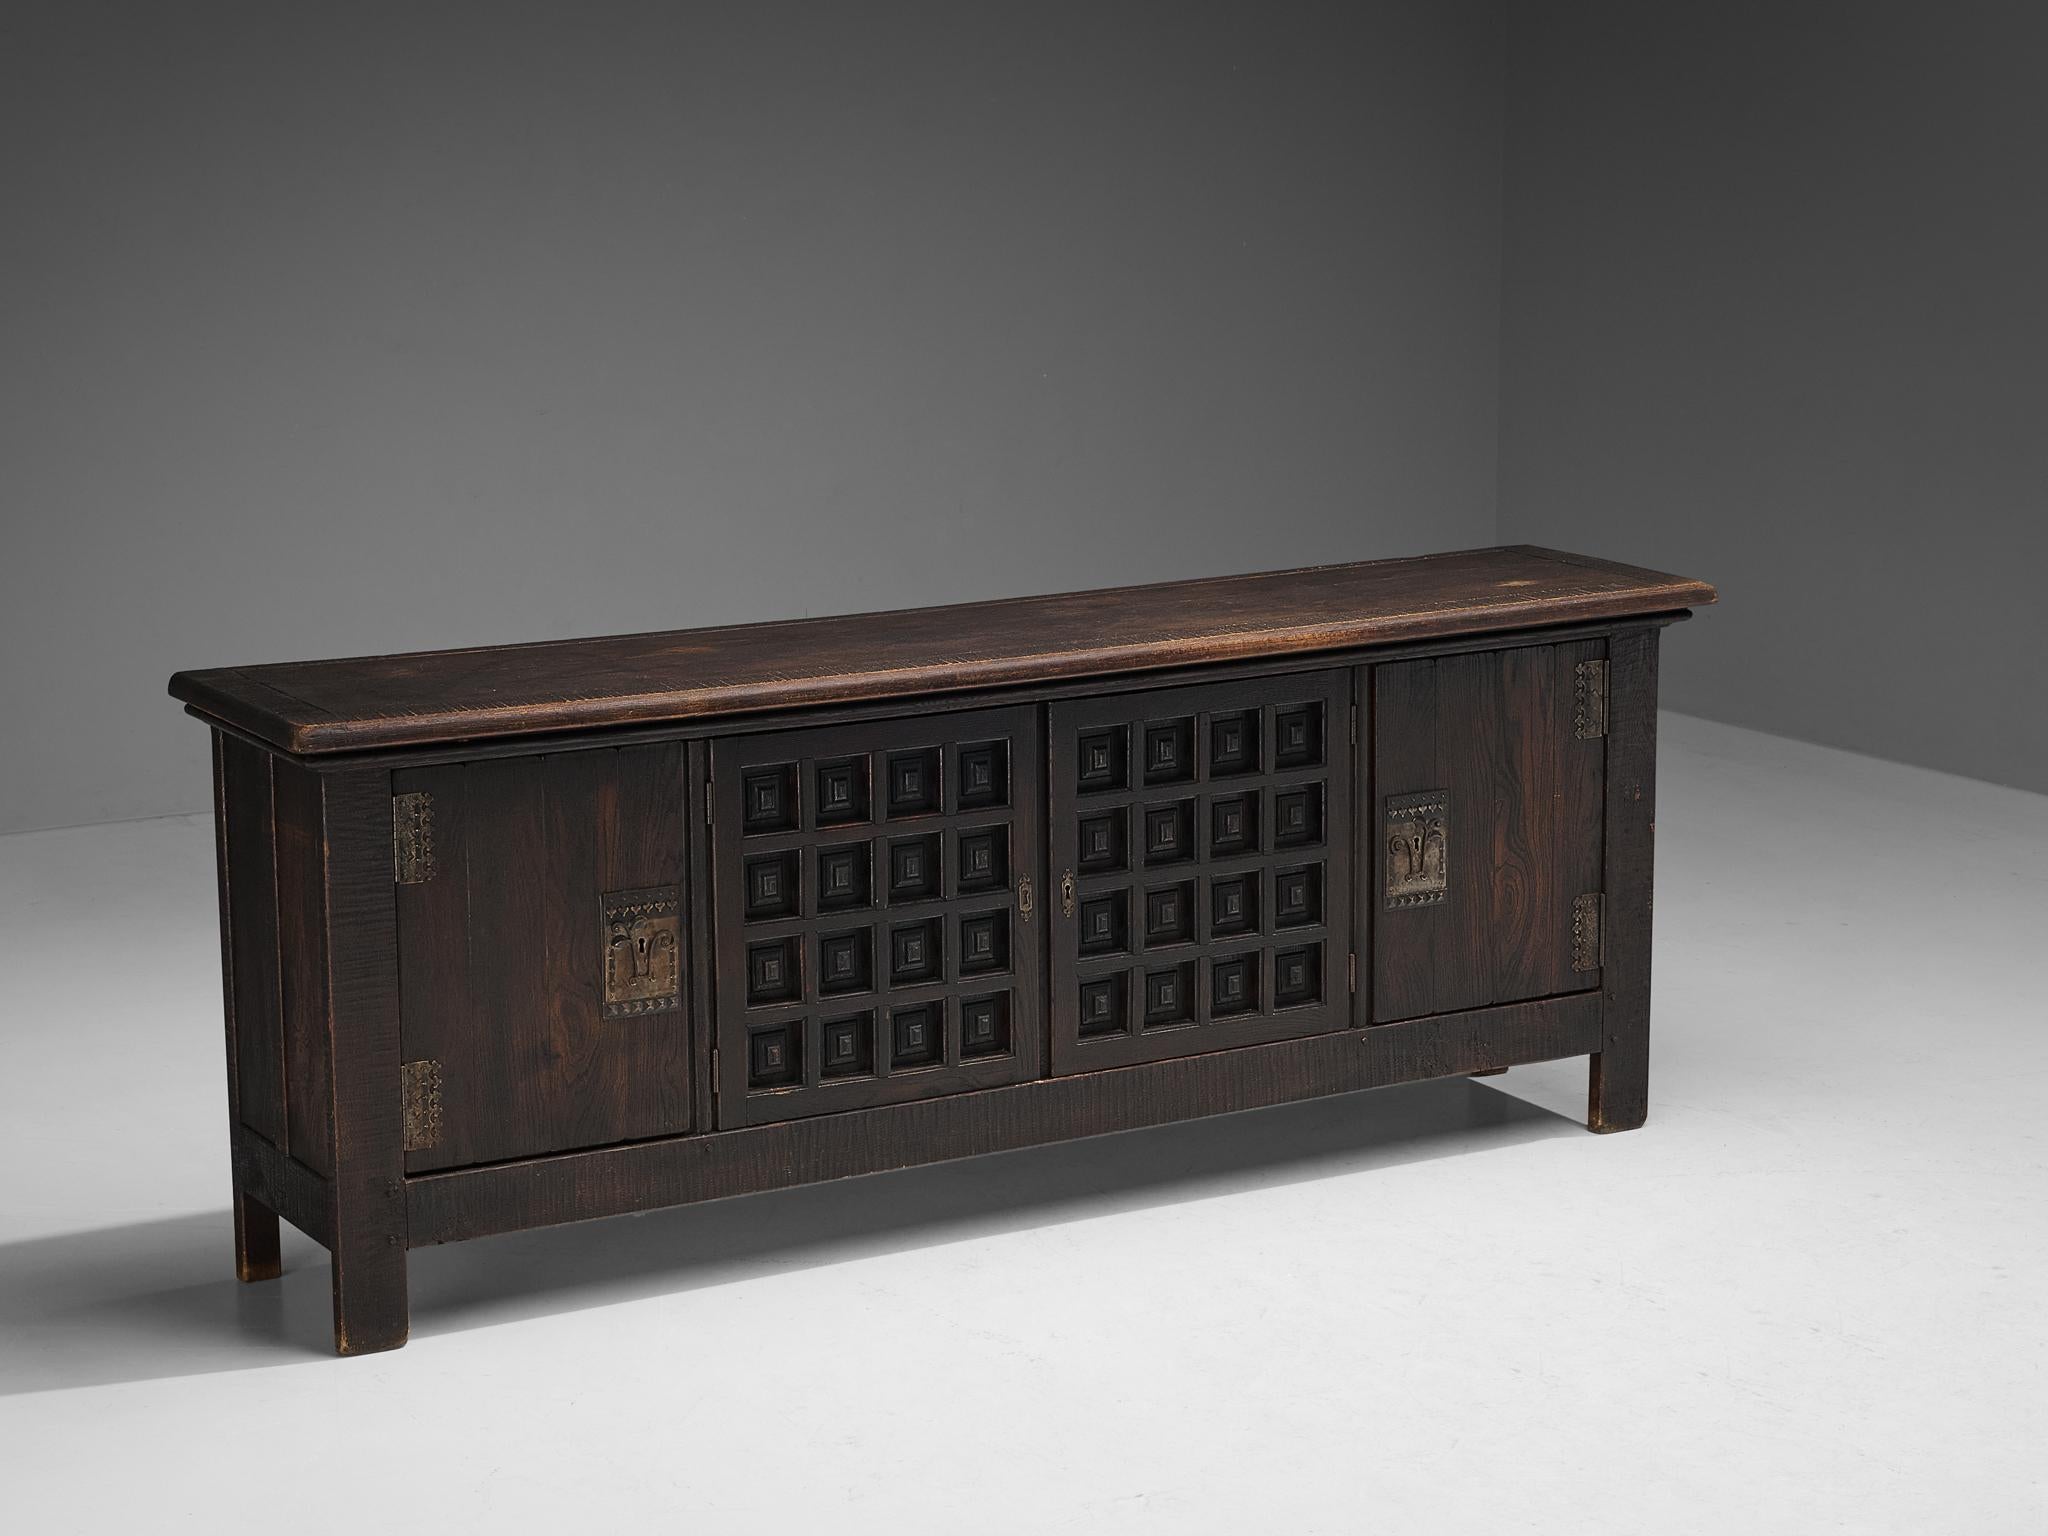 Sideboard, stained oak, metal, Spain, 1940s

This grand Spanish Revival inspired sideboard embodies a solid construction where clear lines and sturdy shapes are allowed to emerge in the design. Thanks to its rectangular shape, the credenza